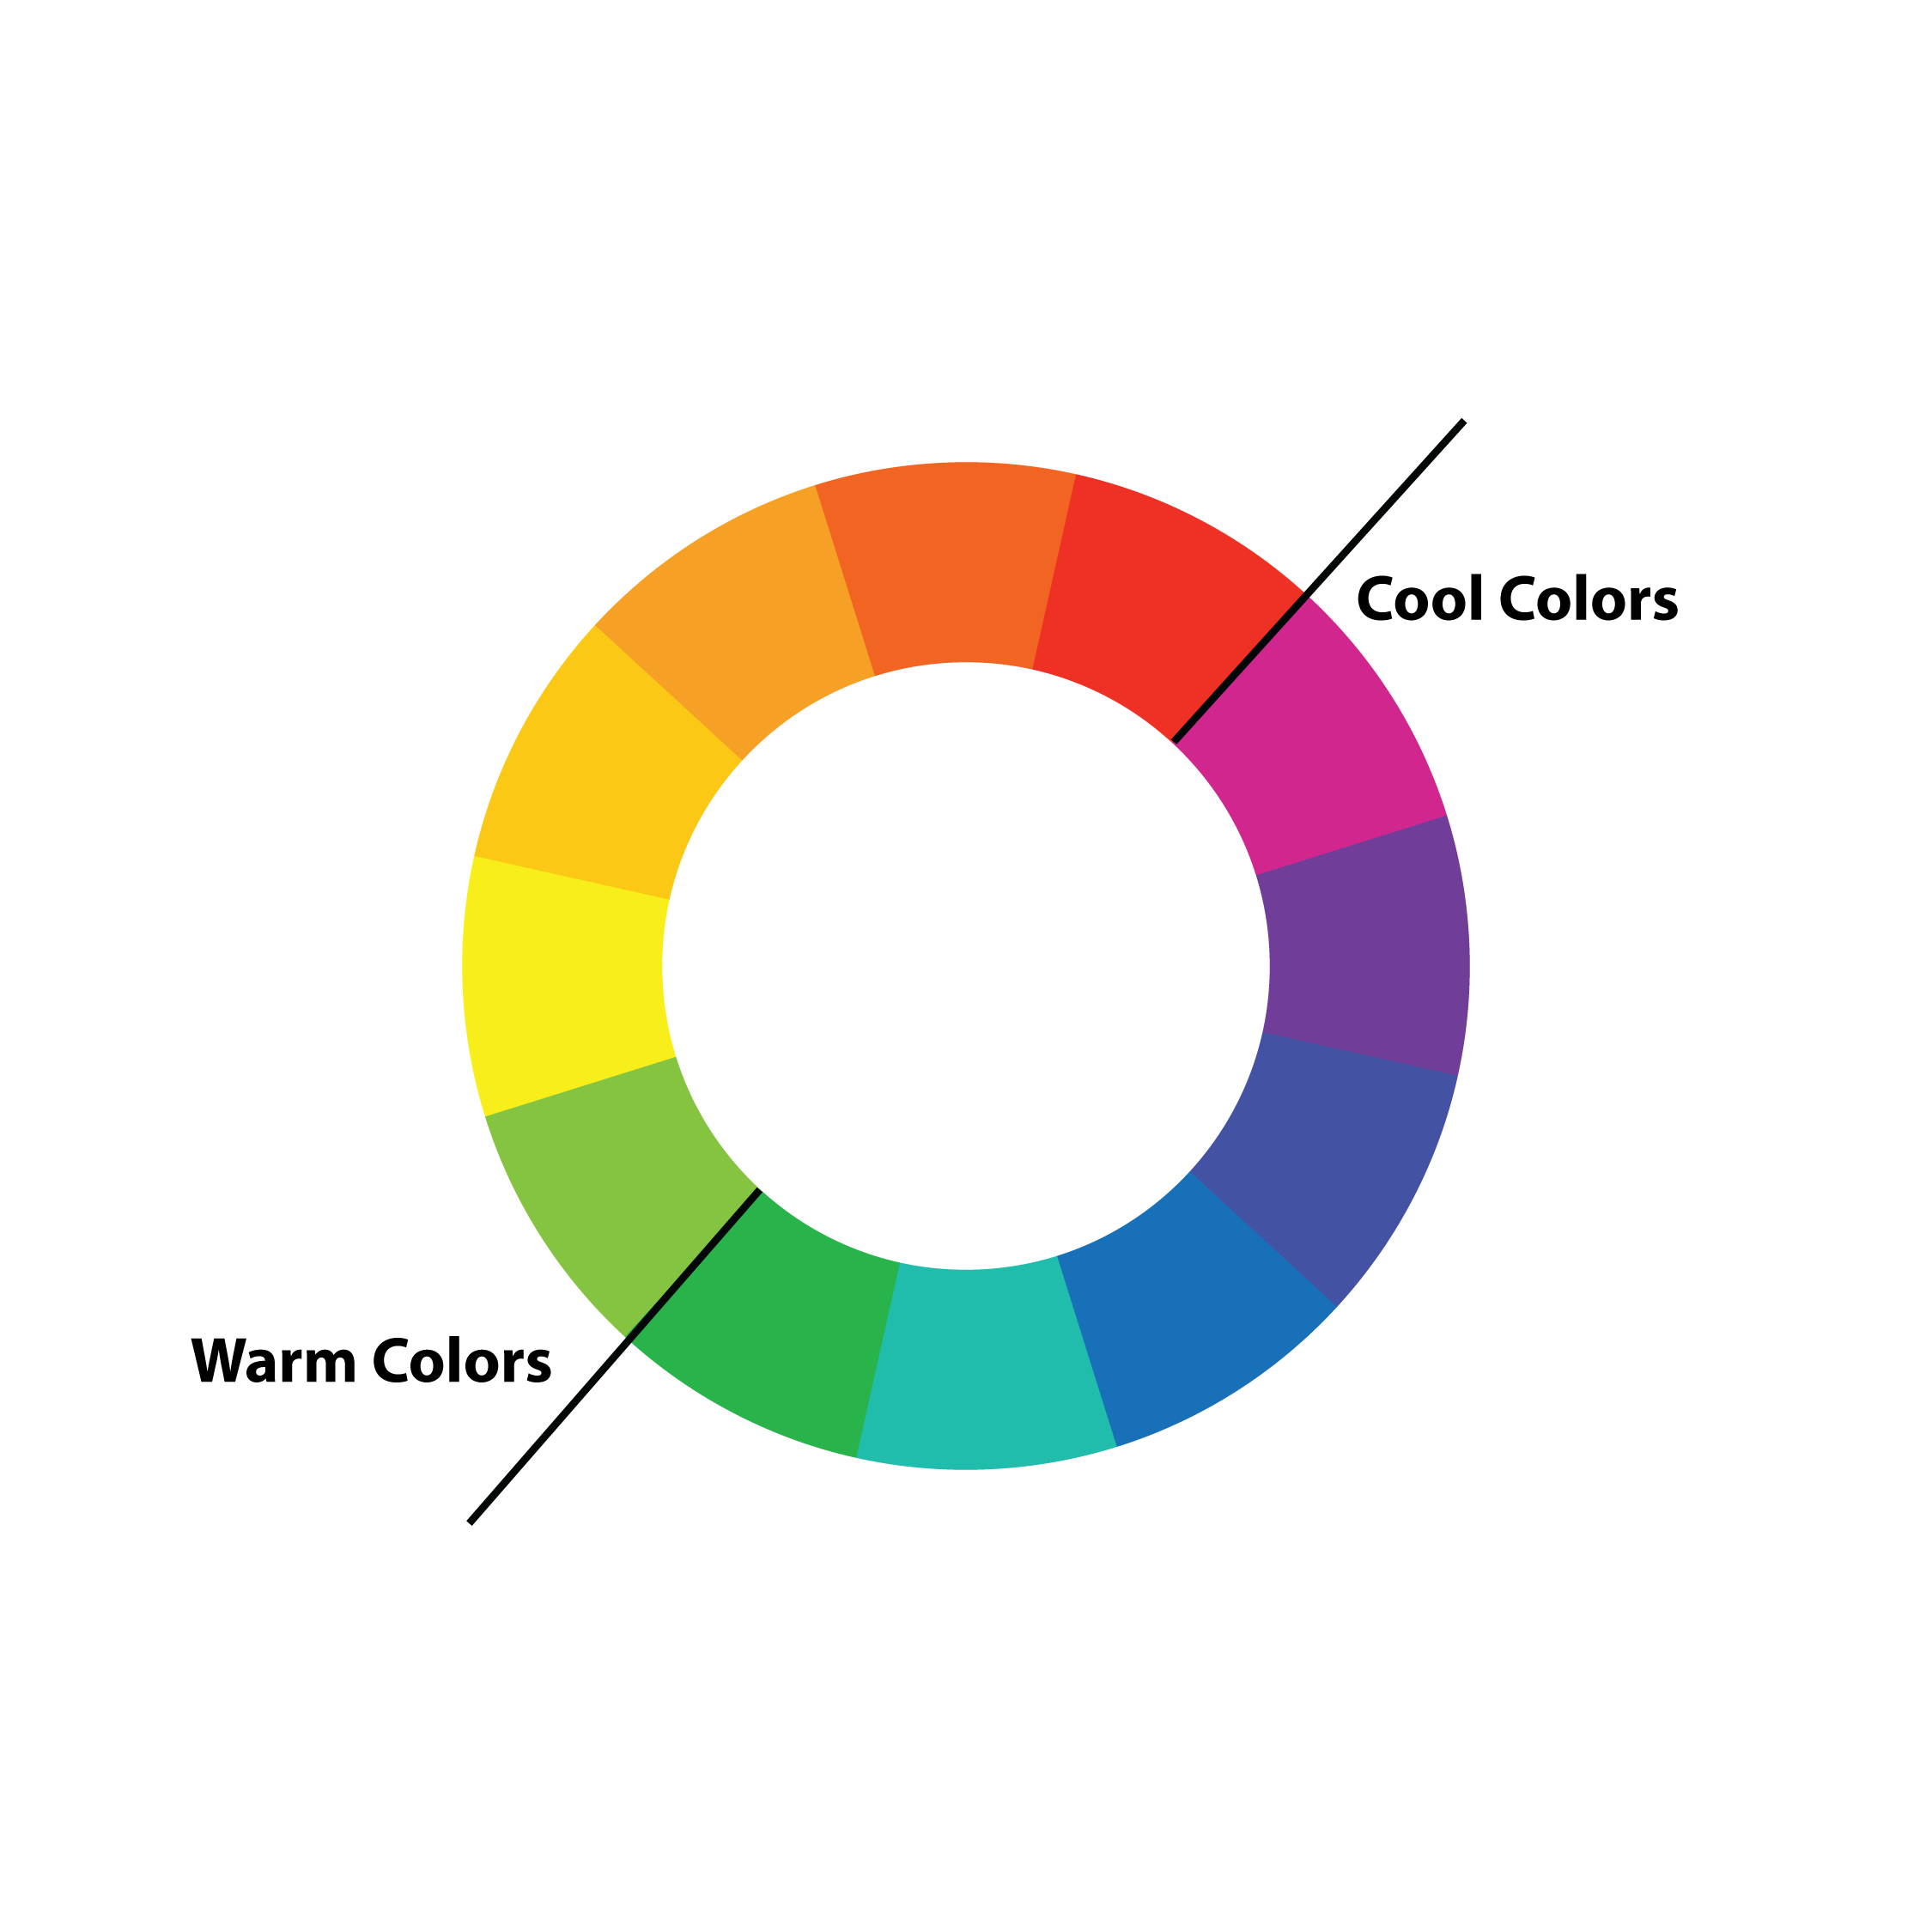 Color Palette Inspiration for High End, Luxury Brands  Luxury branding  design, Brand identity colors, Brand color palette